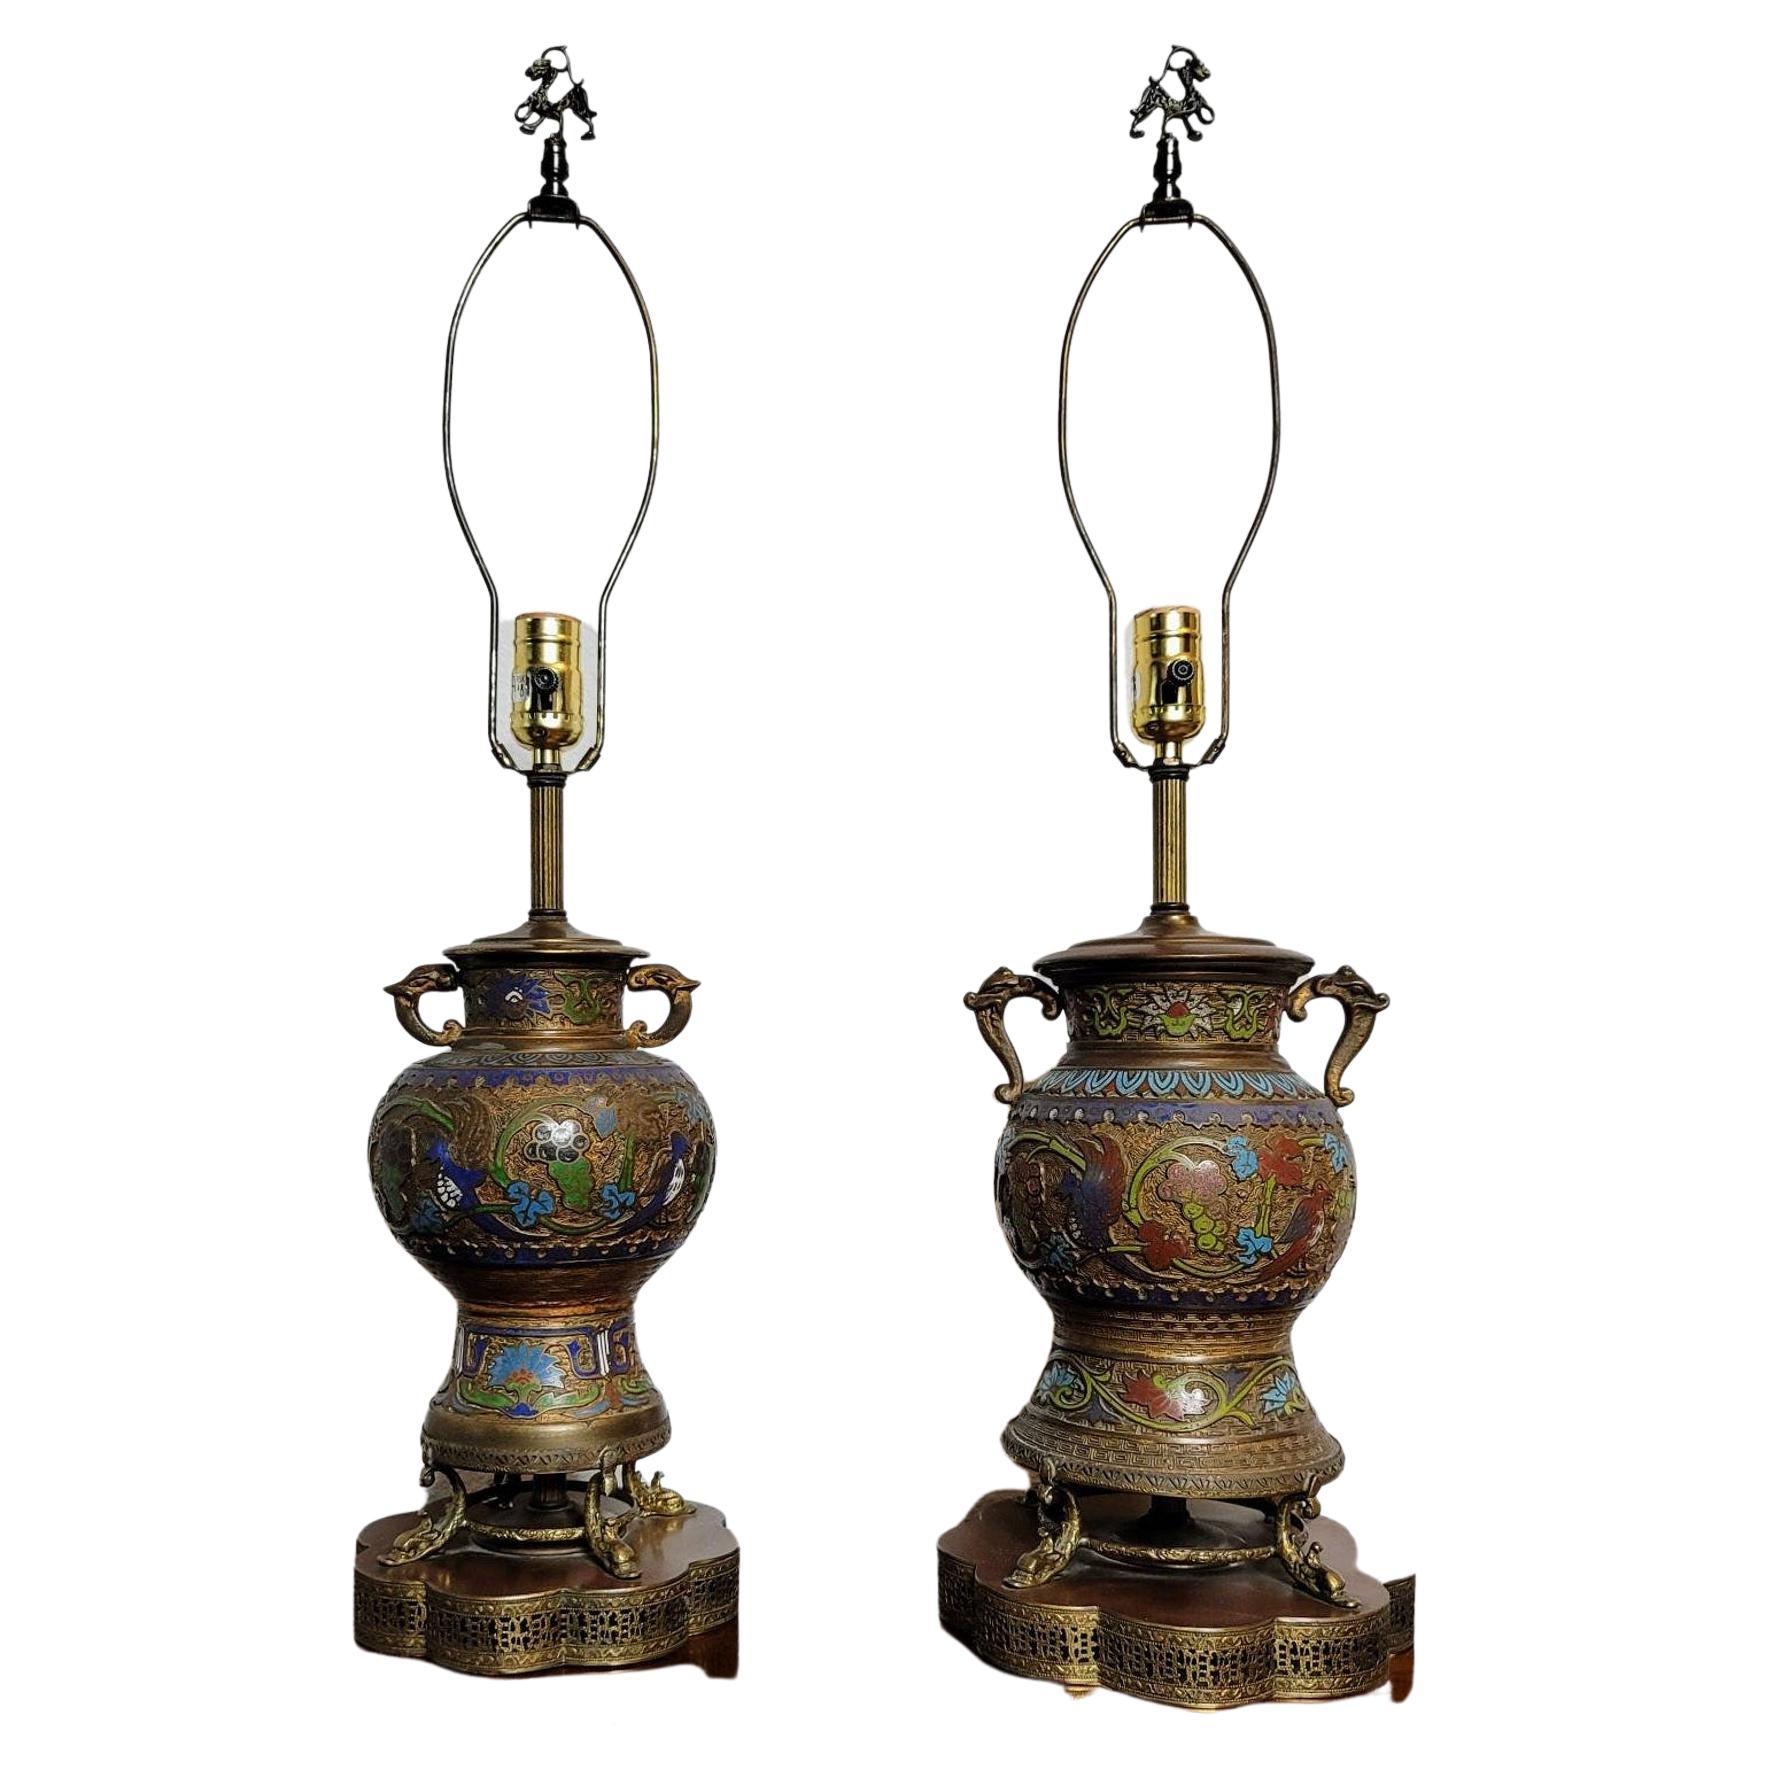 Pair of Antique Asian Champleve’ Enameled Bronze Urns Fashioned As Table Lamps